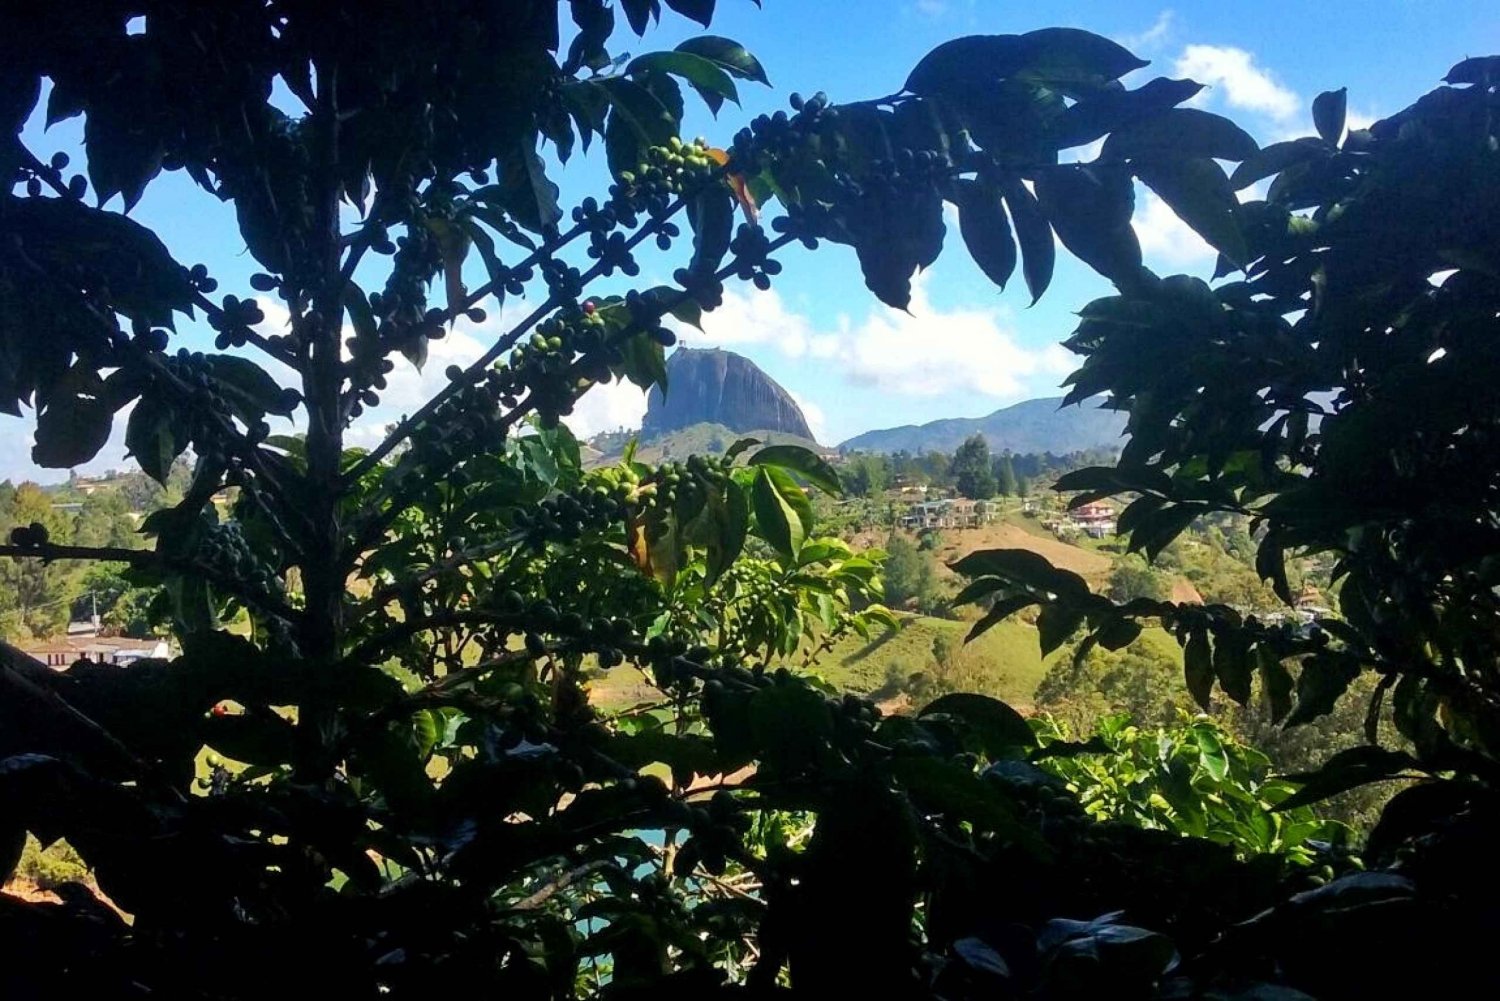 From Medellín: Guatape Rock and Coffee Farm Tour